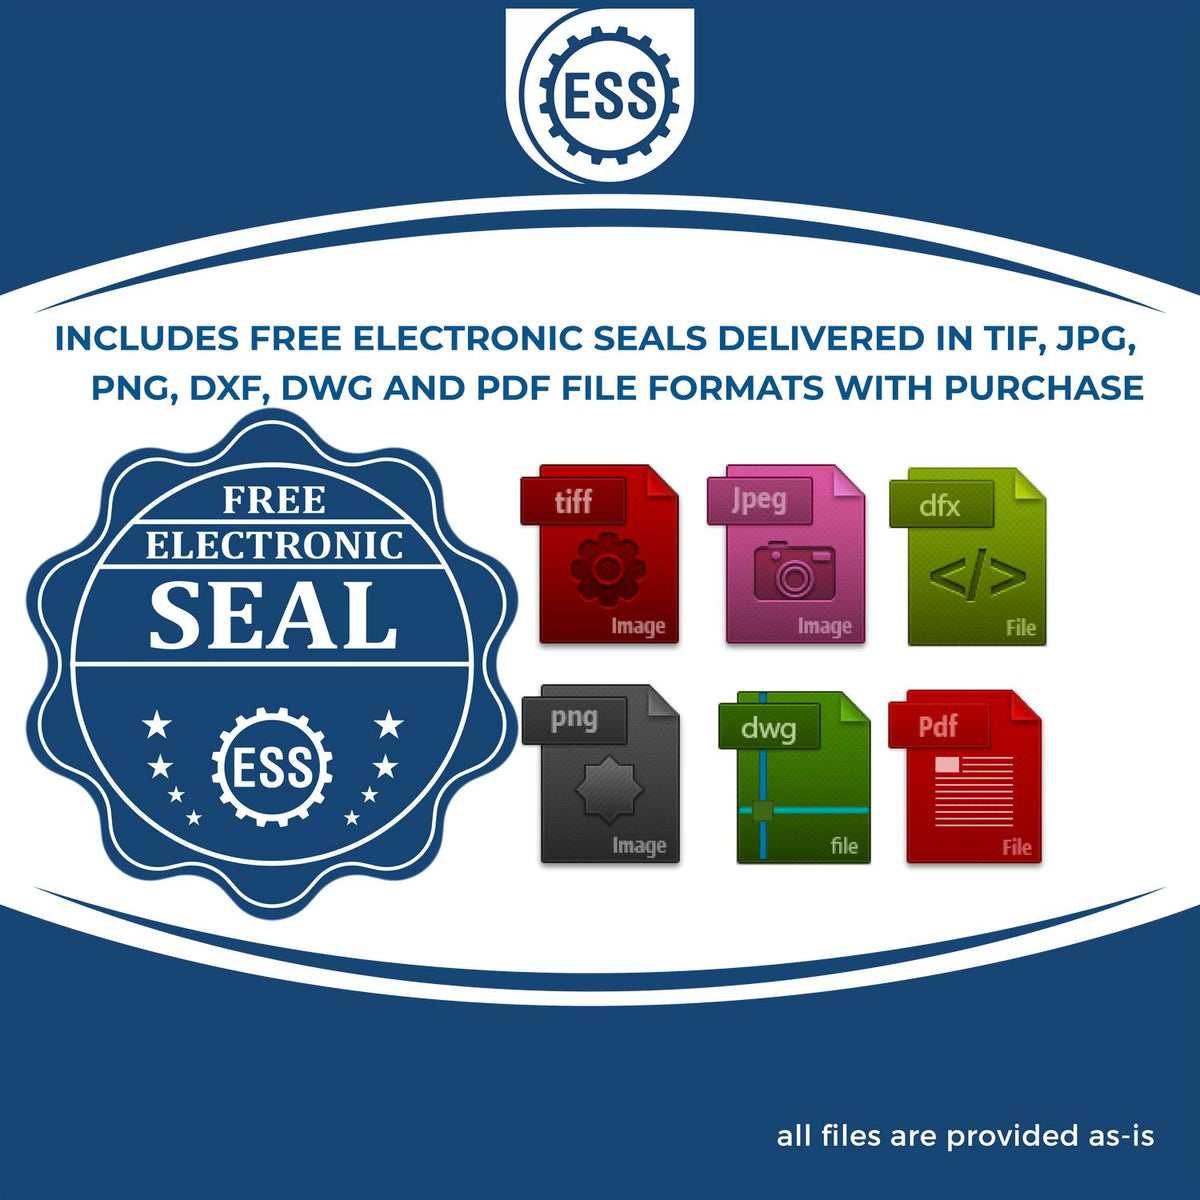 An infographic for the free electronic seal for the Heavy-Duty Virginia Rectangular Notary Stamp illustrating the different file type icons such as DXF, DWG, TIF, JPG and PNG.